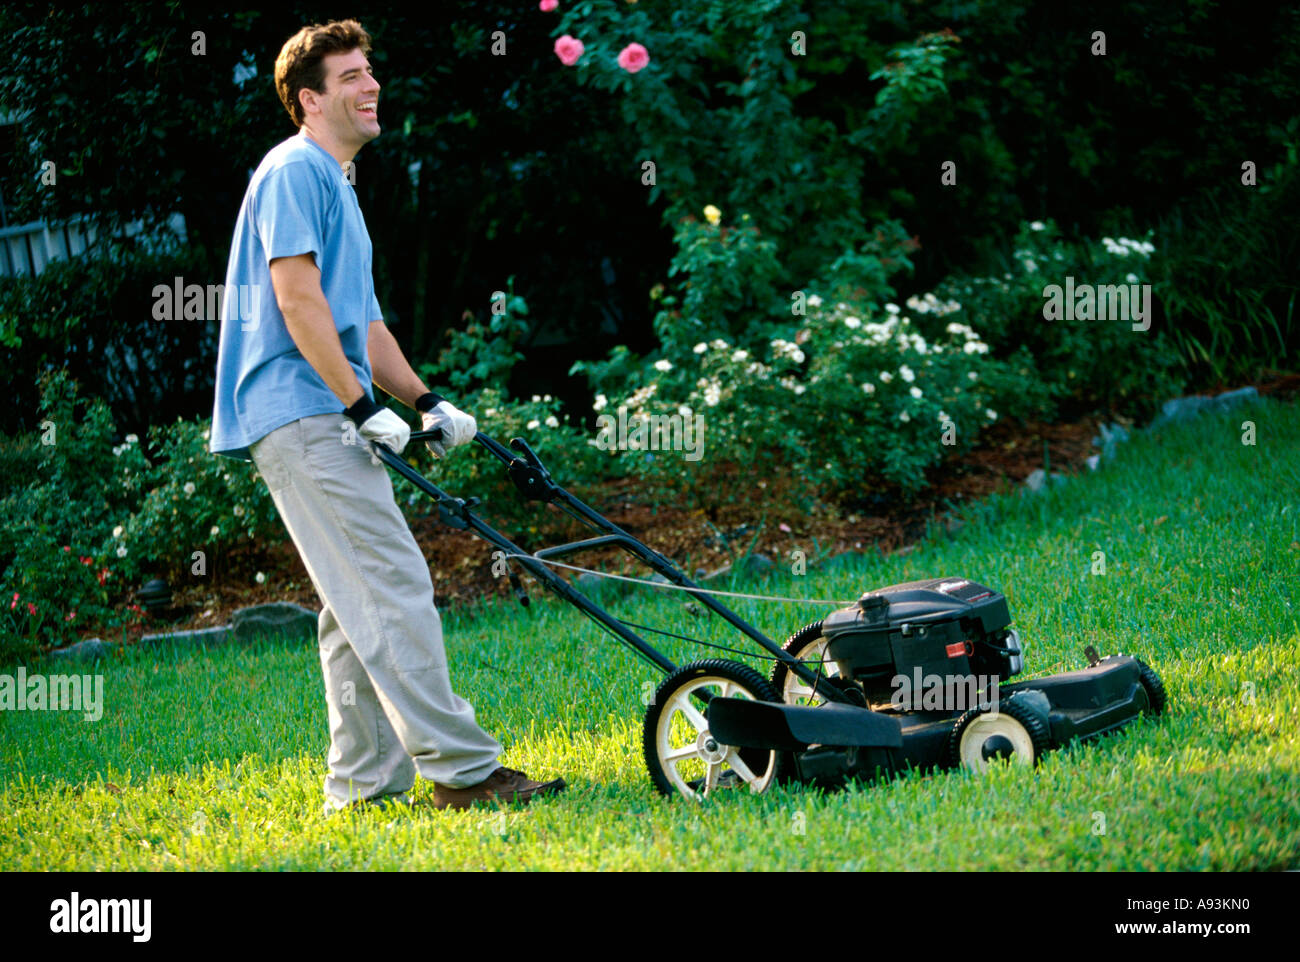 Side profile of a mid adult man mowing the lawn Stock Photo